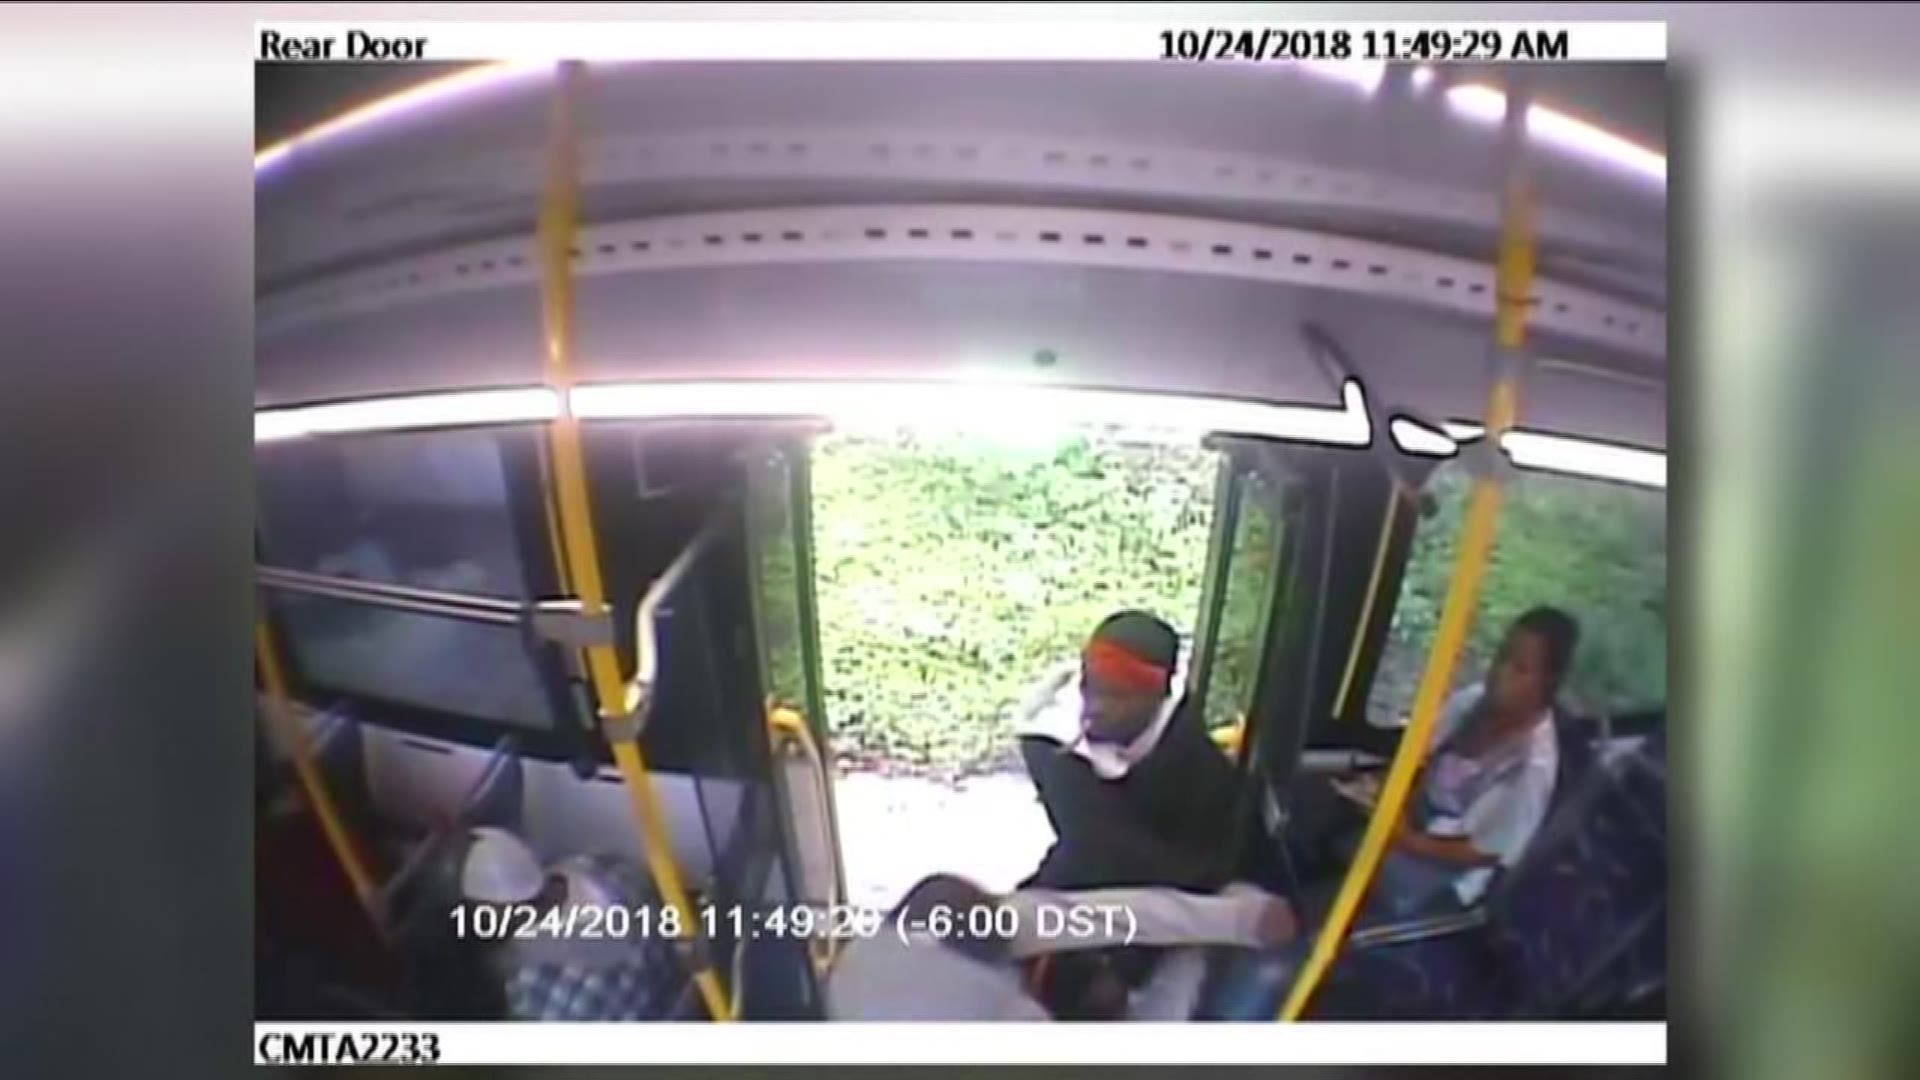 The Austin Police Department is seeking a suspect who allegedly fired at another man inside a Capital Metro bus on Oct. 24. Police described the suspect as a black male in his mid 20s, approximately 5 feet 8 inches tall, wearing an orange bandana, grey sw